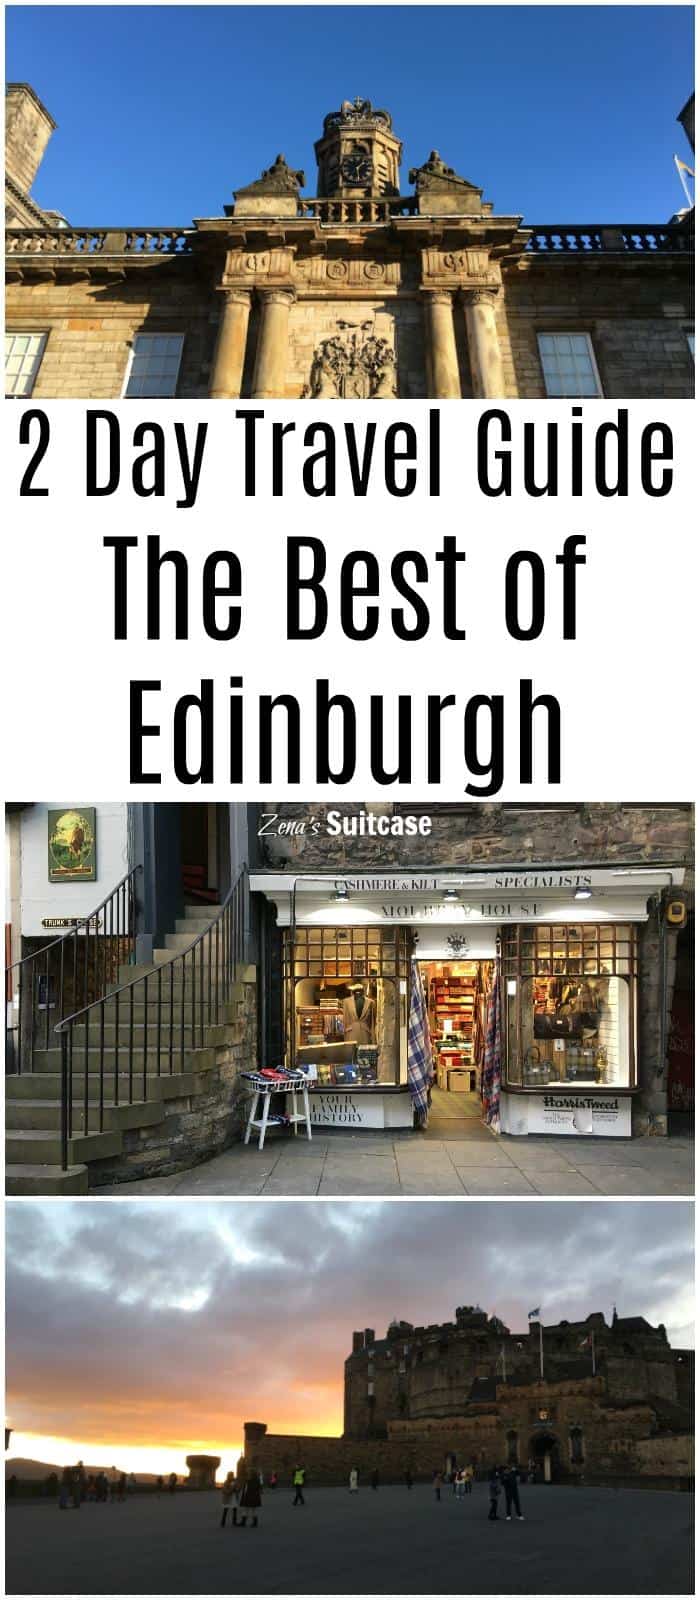 2 Day Travel Guide For Visiting Edinburgh in Scotland. The best places to visit during a short city break in Scotland's capital #Edinburgh #Scotland #visitEdinburgh #travelguide 